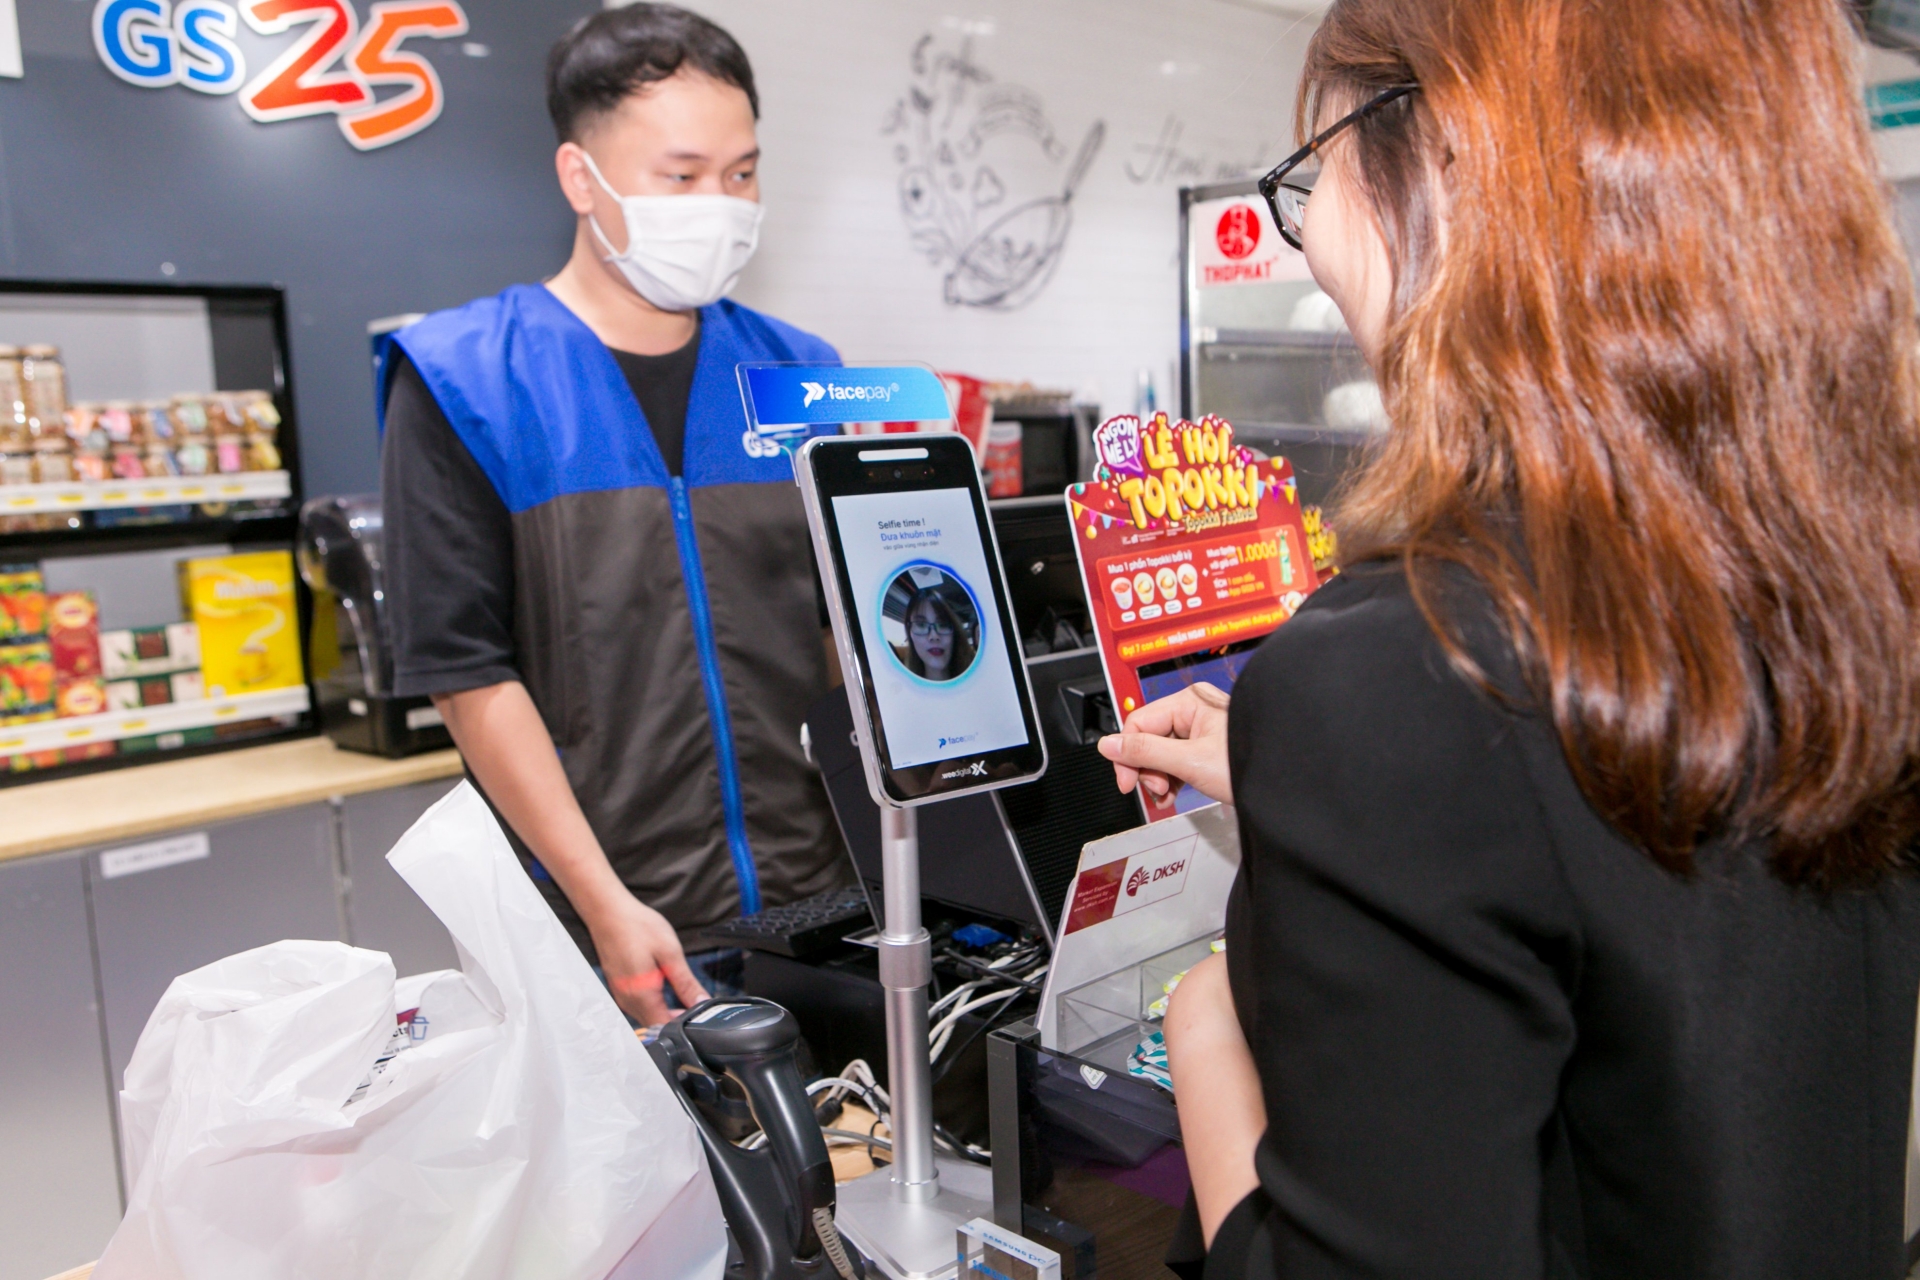 Wee Digital to launch facial payment in convenience store chain GS25